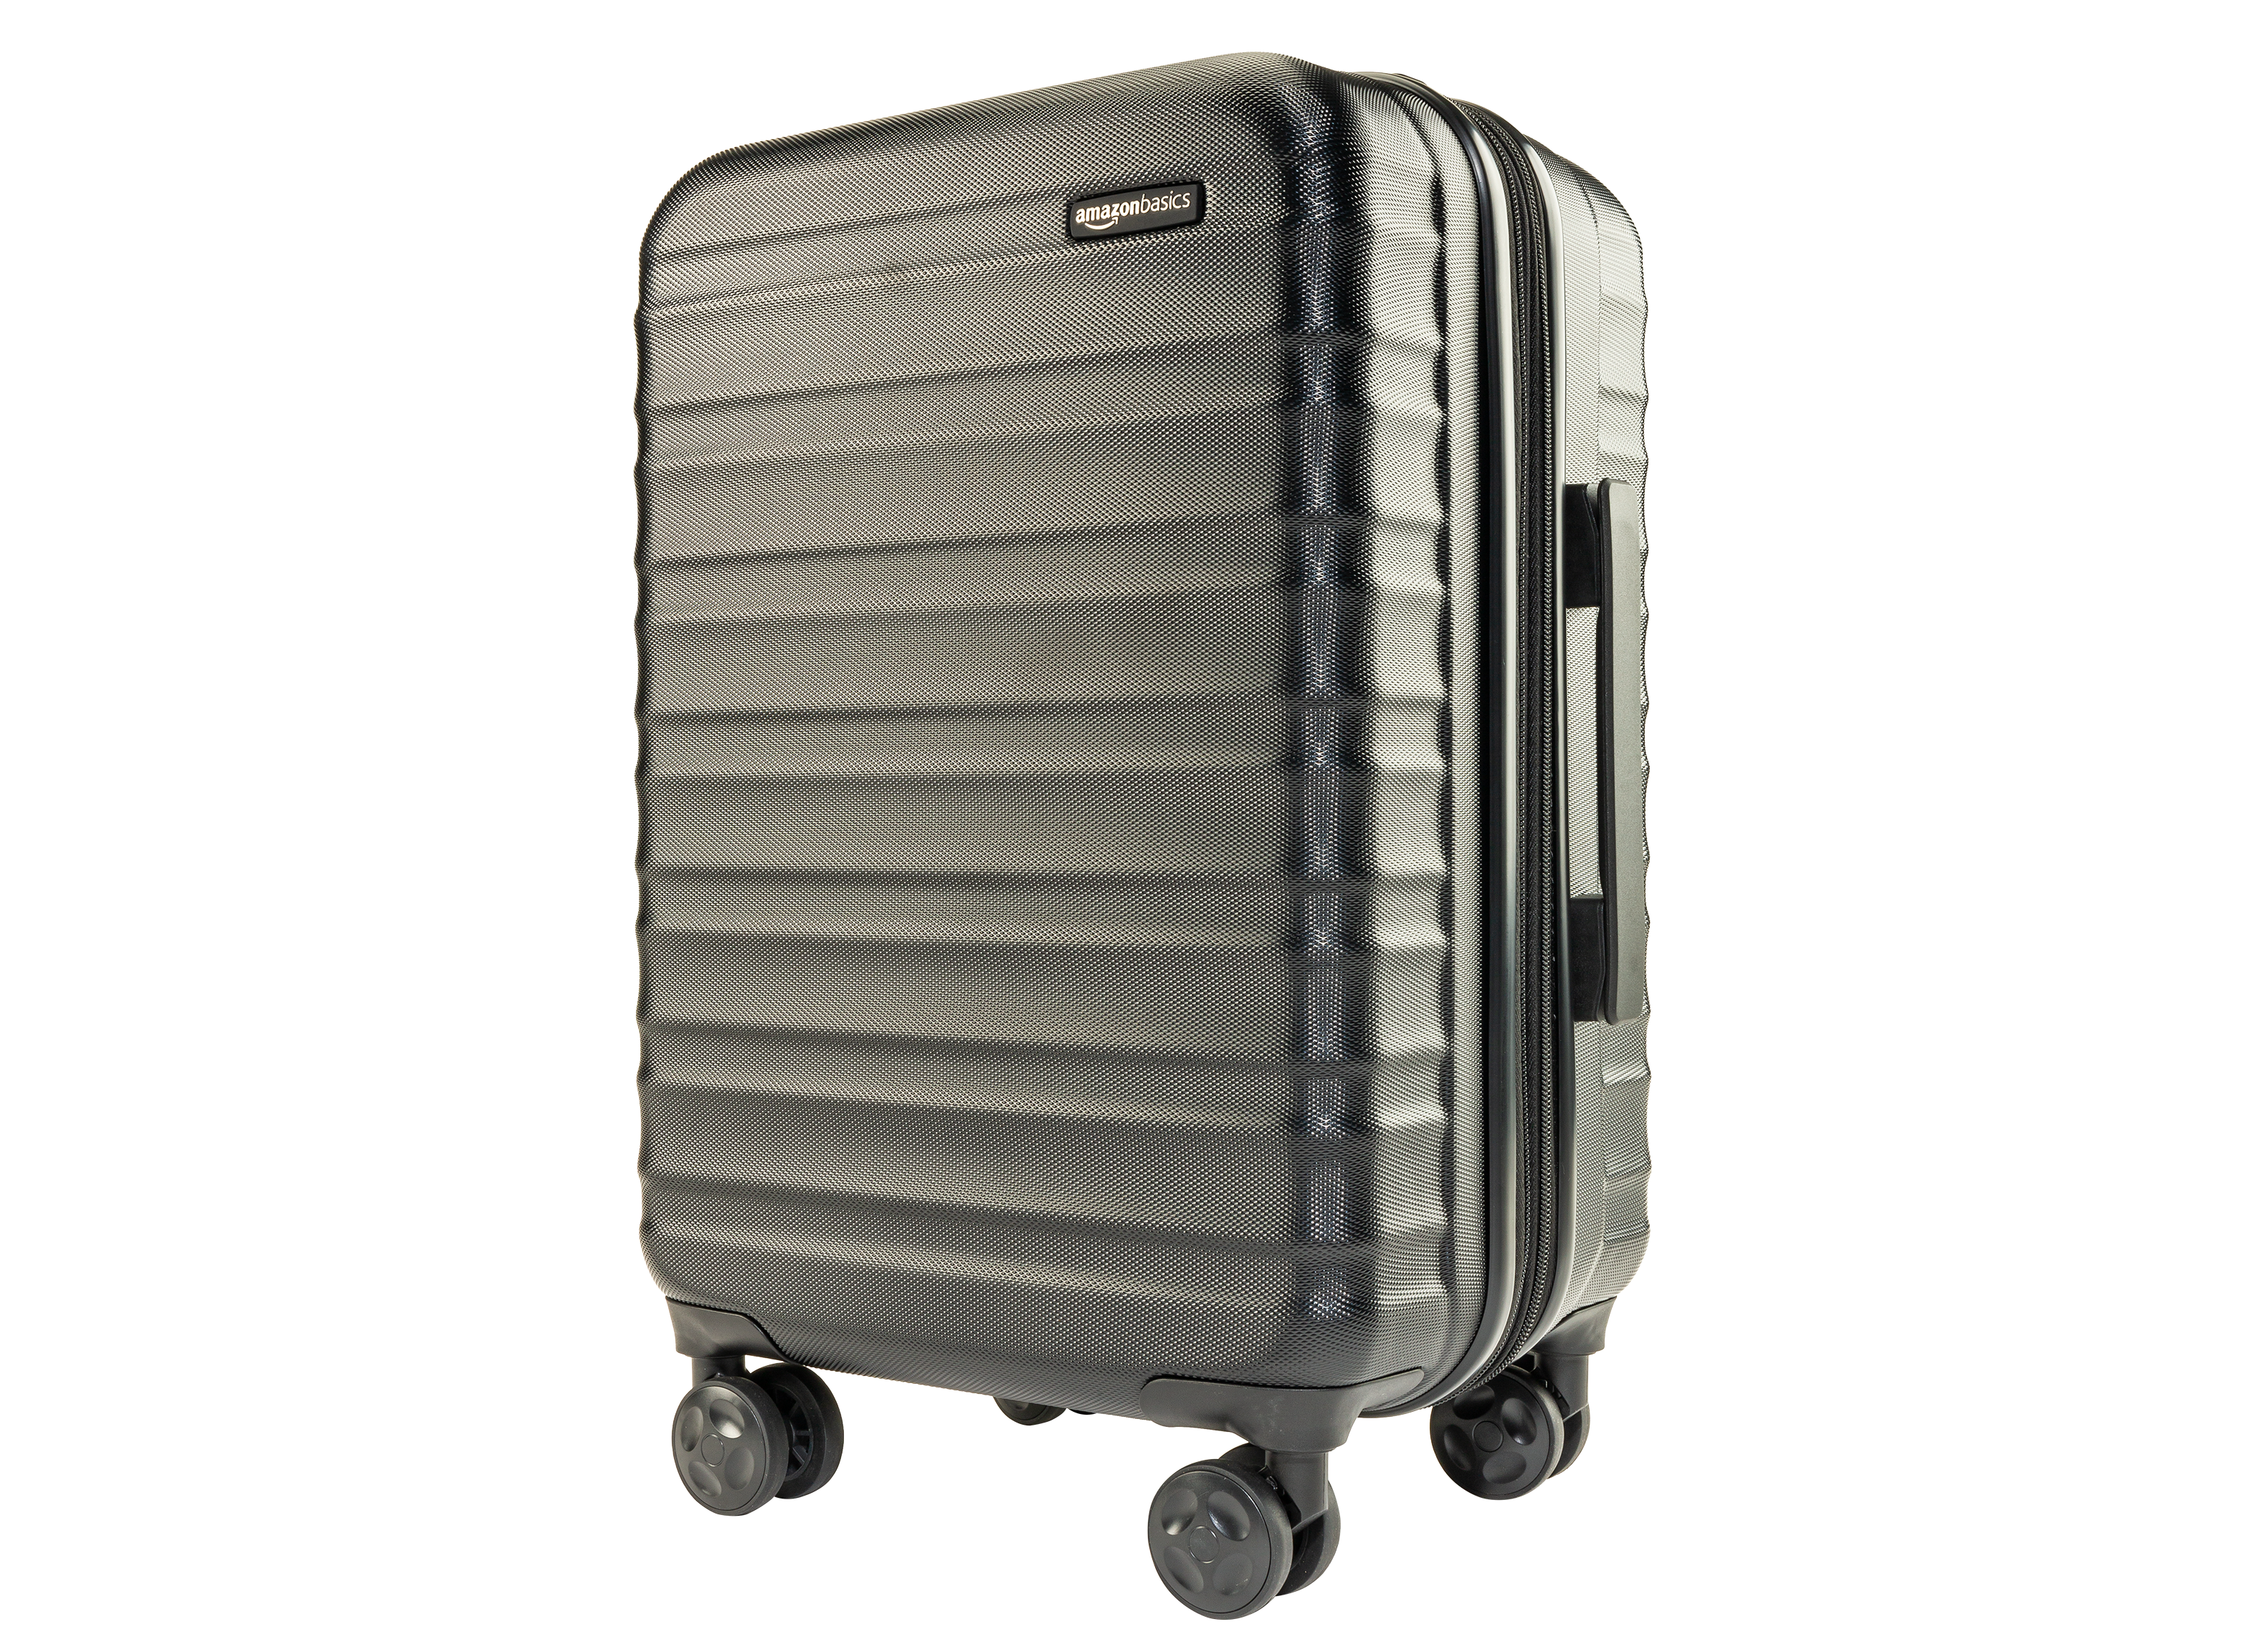 Amazon Basics 21-Inch Hardside Spinner Luggage Review - Consumer Reports